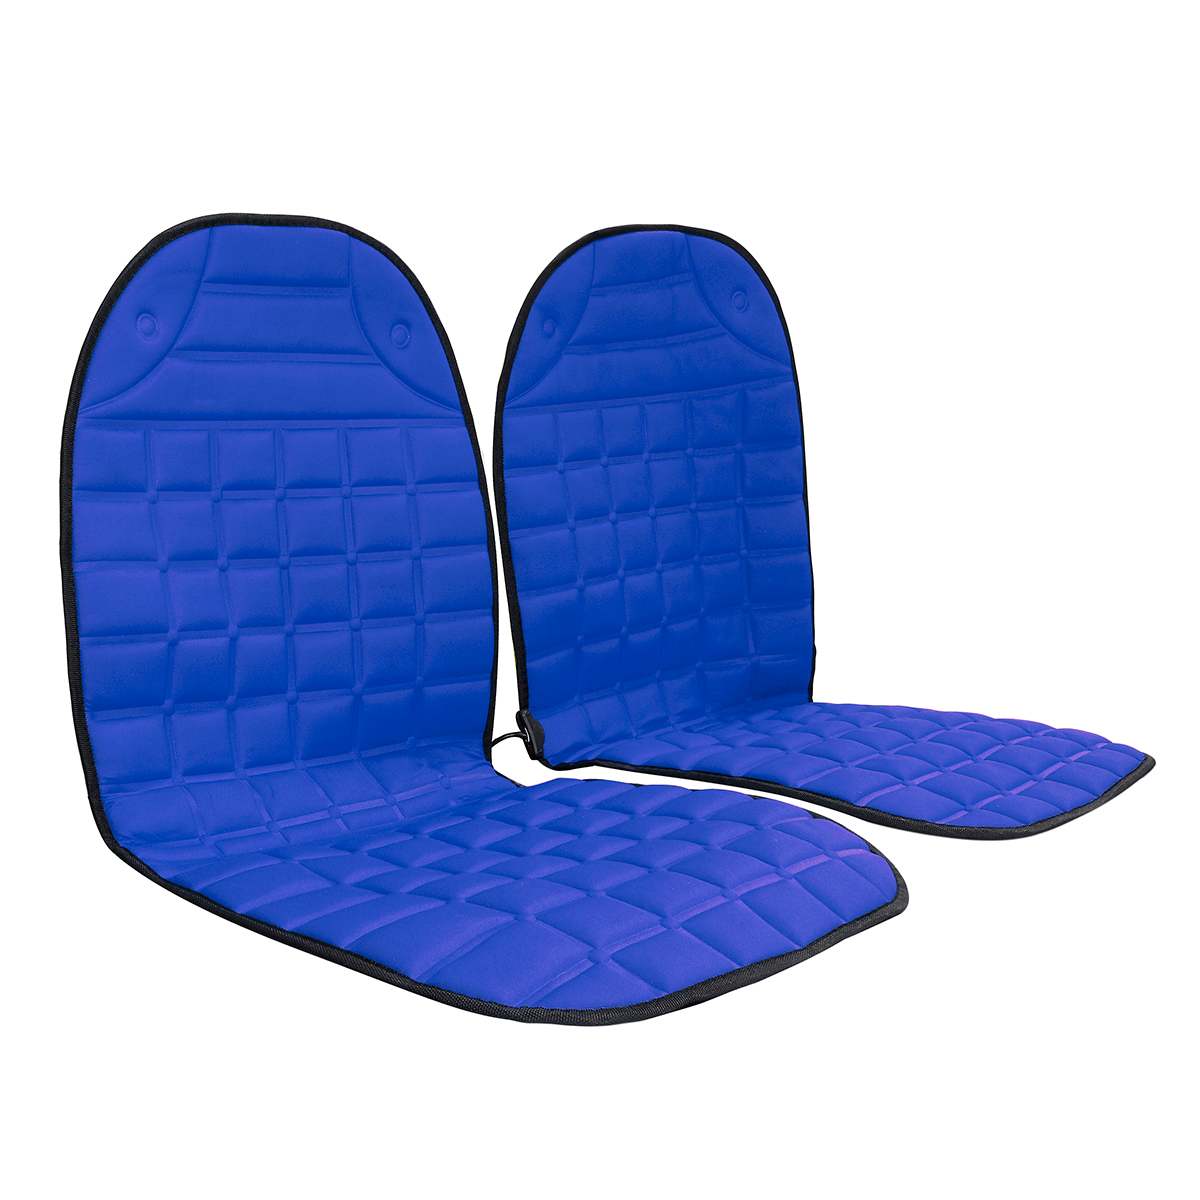 Heated Car Seat Cover Electric Cushion (Set of 2)